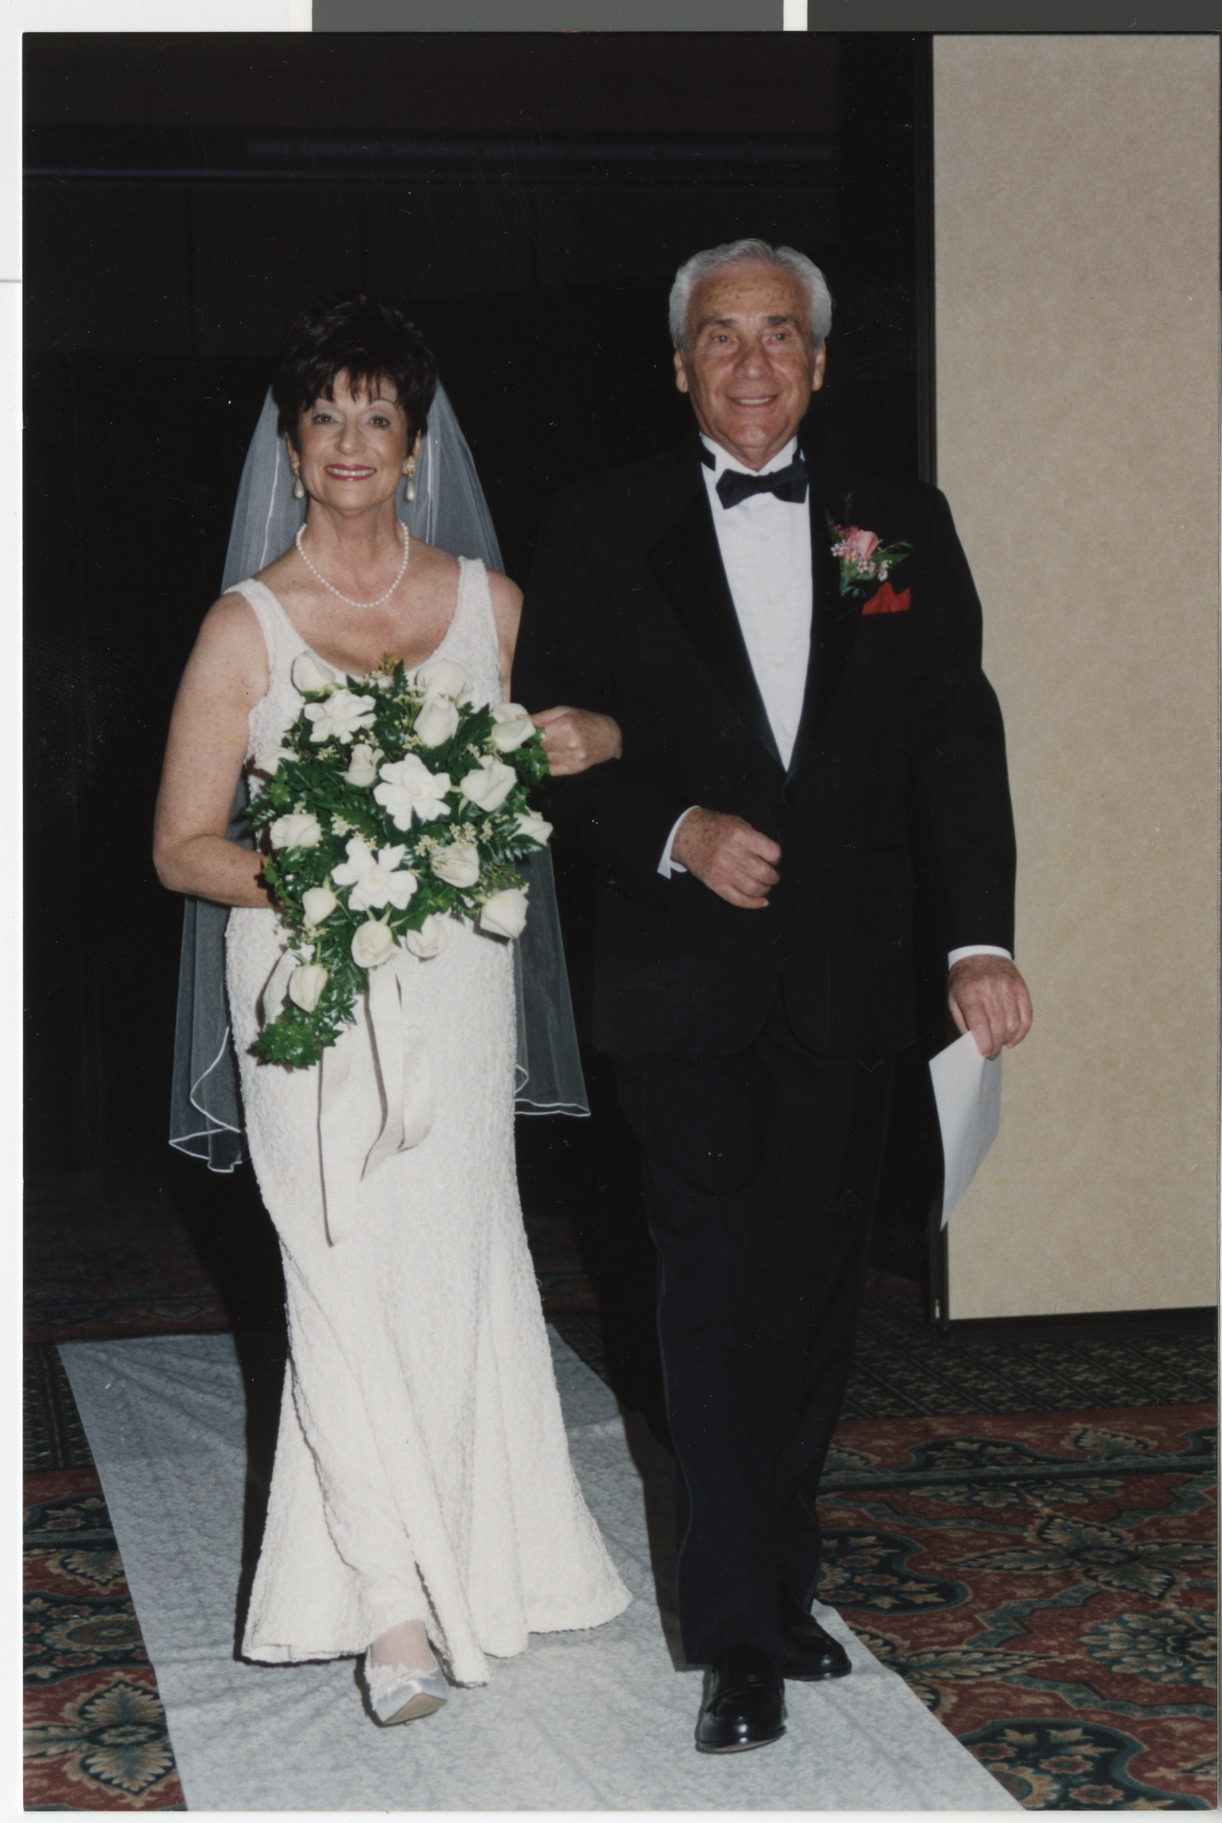 Photograph of Shelley Berkley and Dr. Lawrence Lehrner on their wedding day, 1999